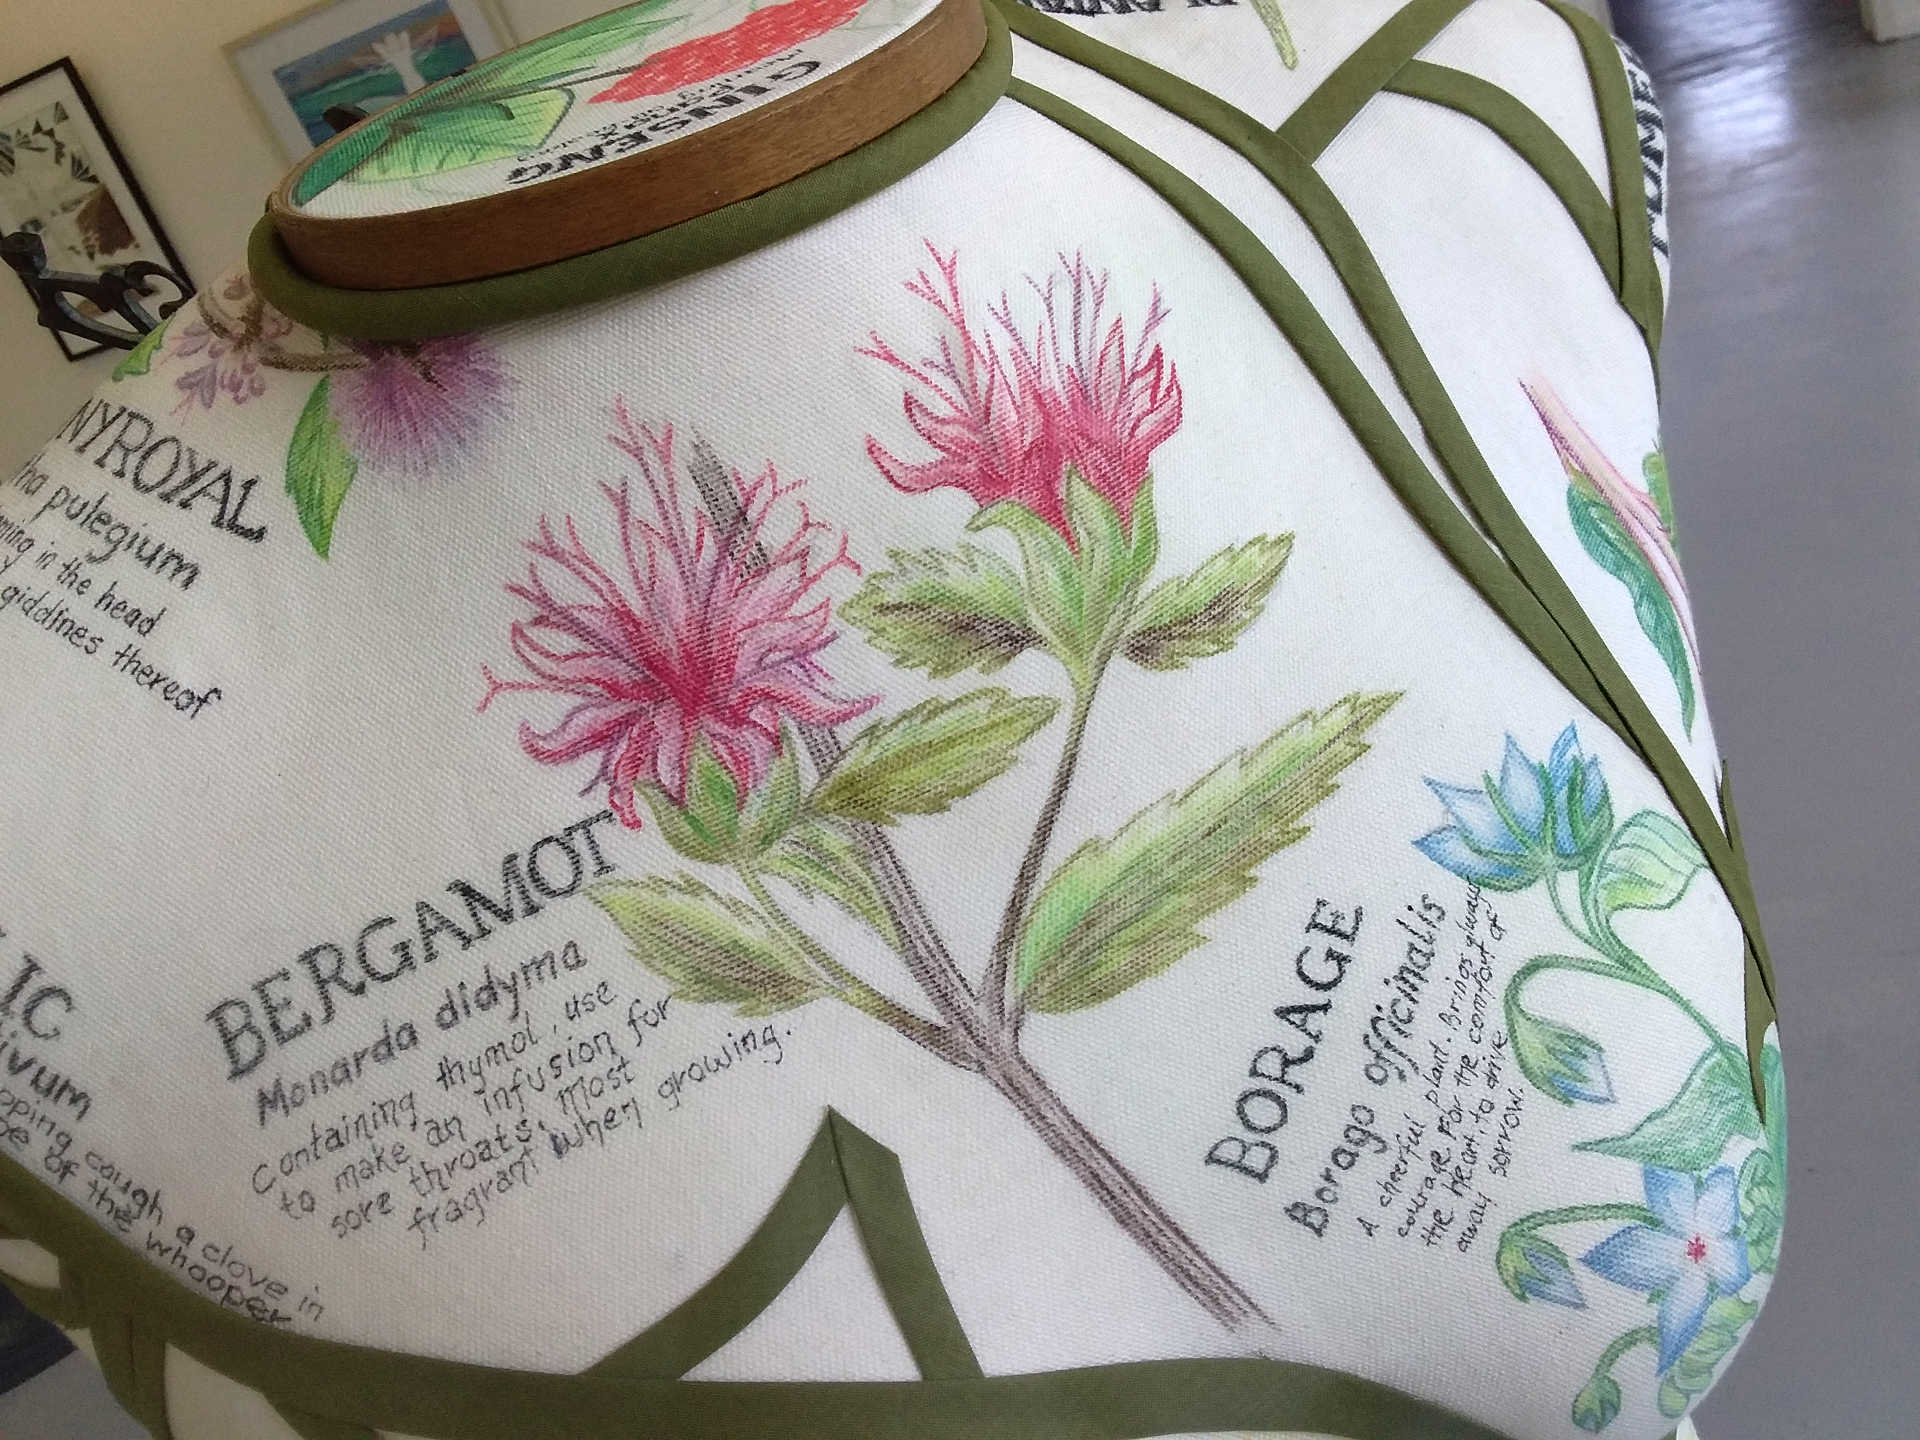 A close-up detail shot of 'Disempowerment' by Libby Bloxham, showing a white fabric panel covering the chest of a female torso mannequin. The panel contains various pencil illustrations of botanical specimens, with two clearly visible from this angle. One is a branch with jagged green leaves and sprawling red/pink flowers, and the text: 'Bergamot', 'Monarda didyma', 'Containing thymol, use to make an infusion for sore throats. Most fragrant when growing.'. The second is bright blue flower with smooth leaves, and the text: 'Borage', 'Borago officinalis', 'A cheerful plant. Brings always courage. For the comfort of the heart, to drive away sorrow.'. 